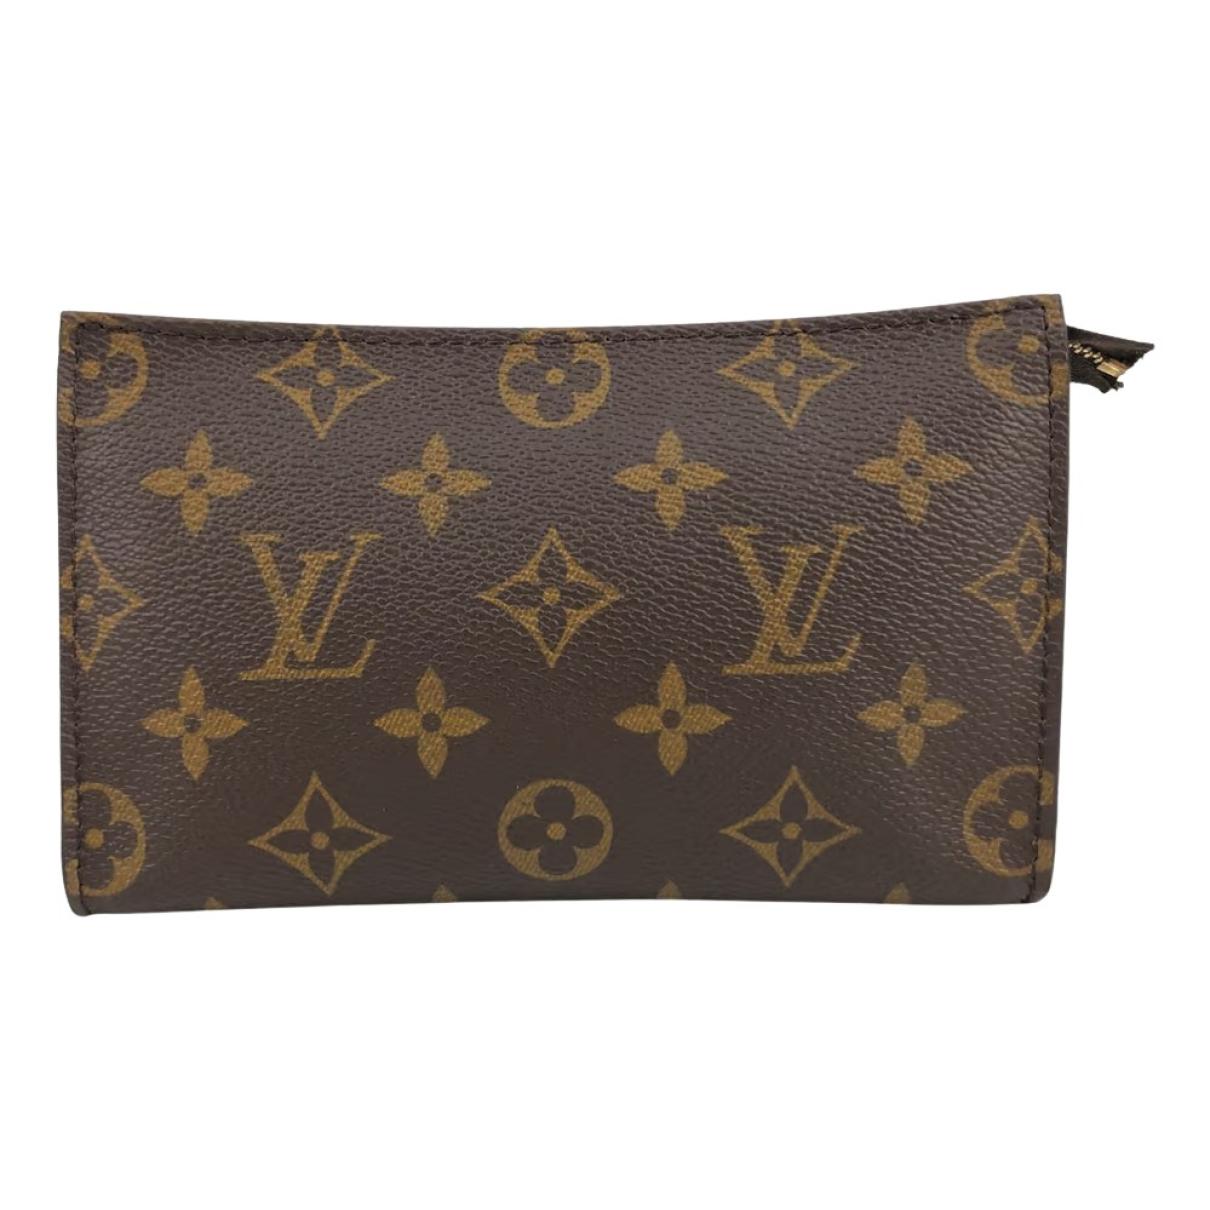 BRAND NEW M47546 Louis Vuitton Monogram Canvas Toiletry Pouch 15 Shipped  From US